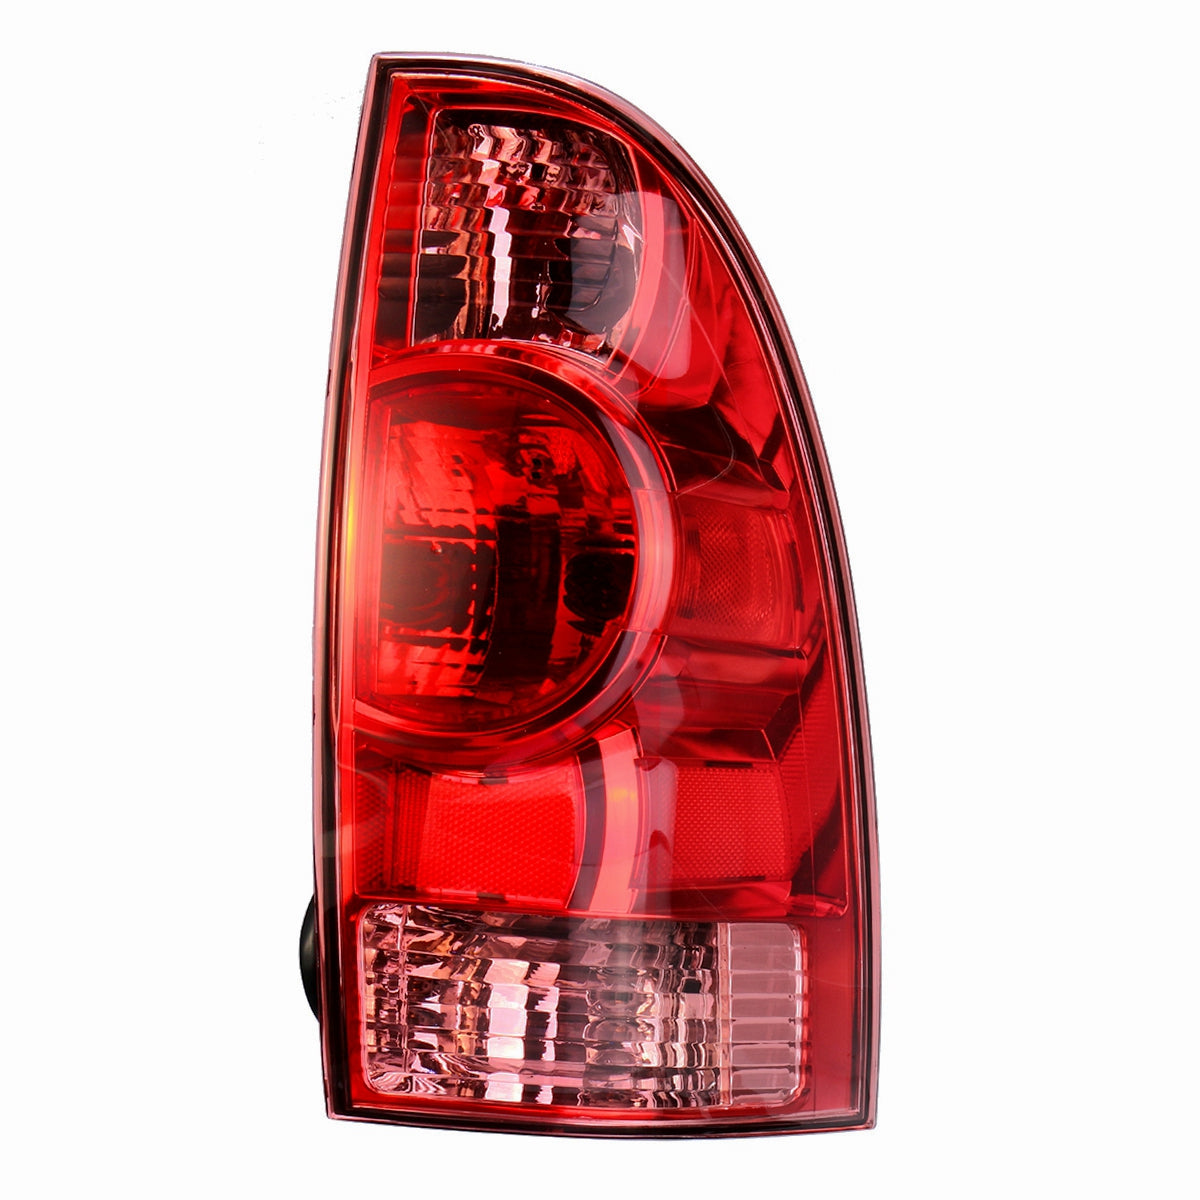 Firebrick Car Rear Tail Light Assembly Brake Lamp with No Bulb Left/Right for Toyota Tacoma Pickup 2005-2015